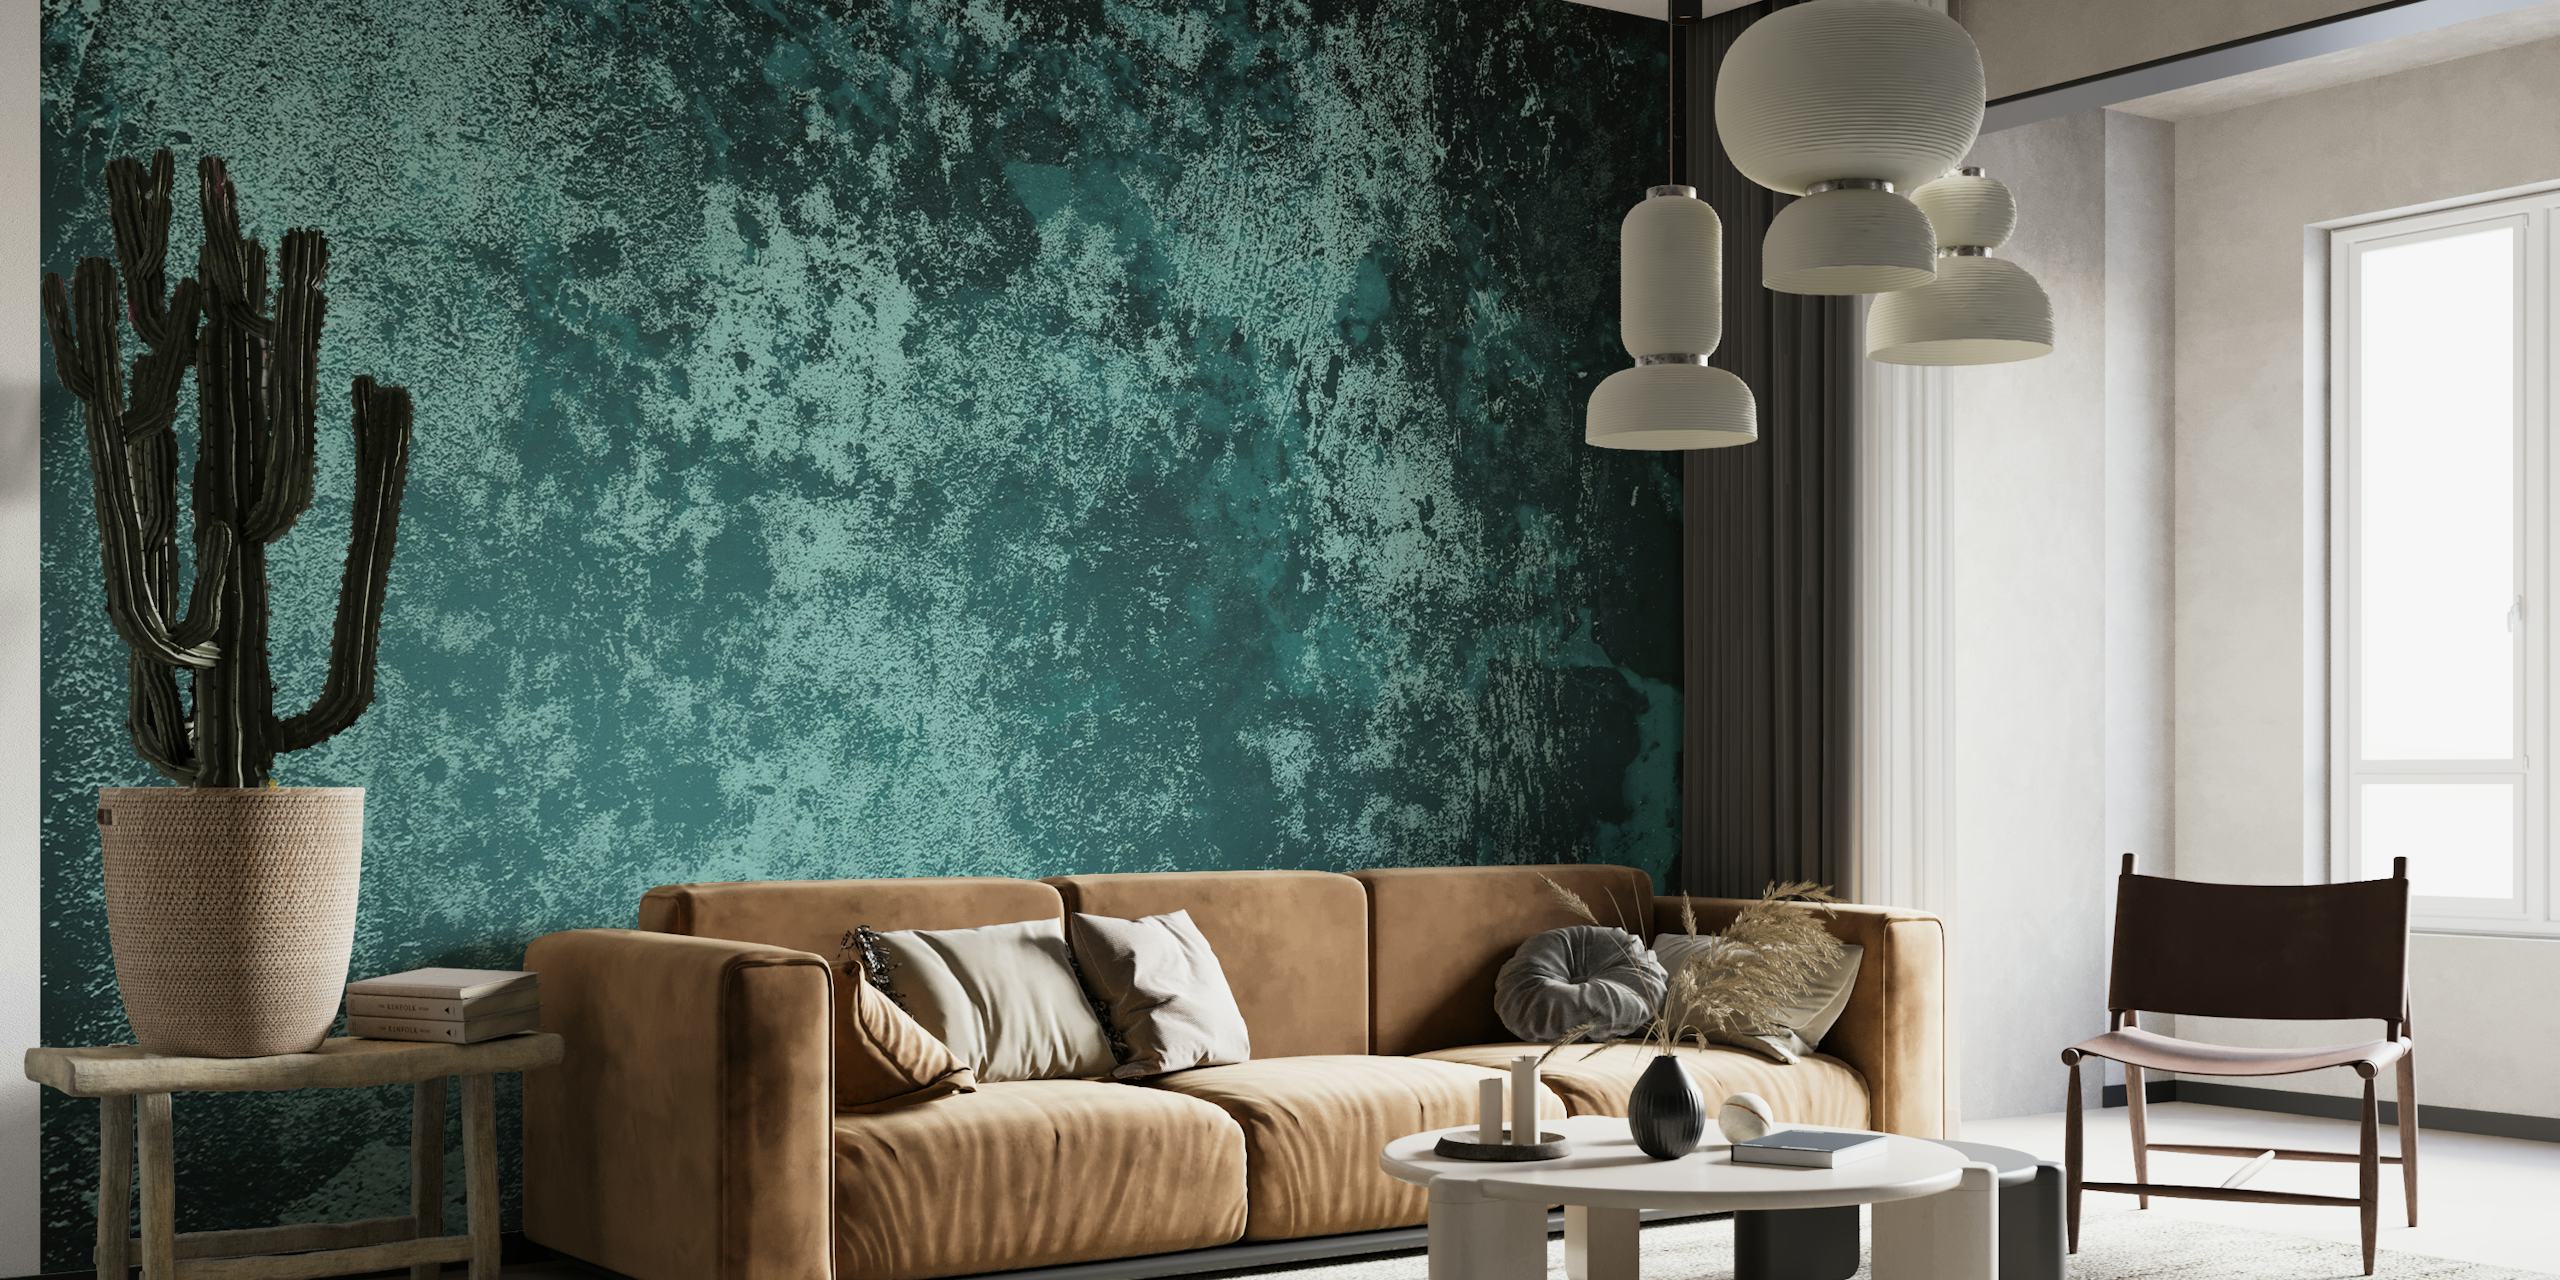 Concrete texture in teal blue ταπετσαρία